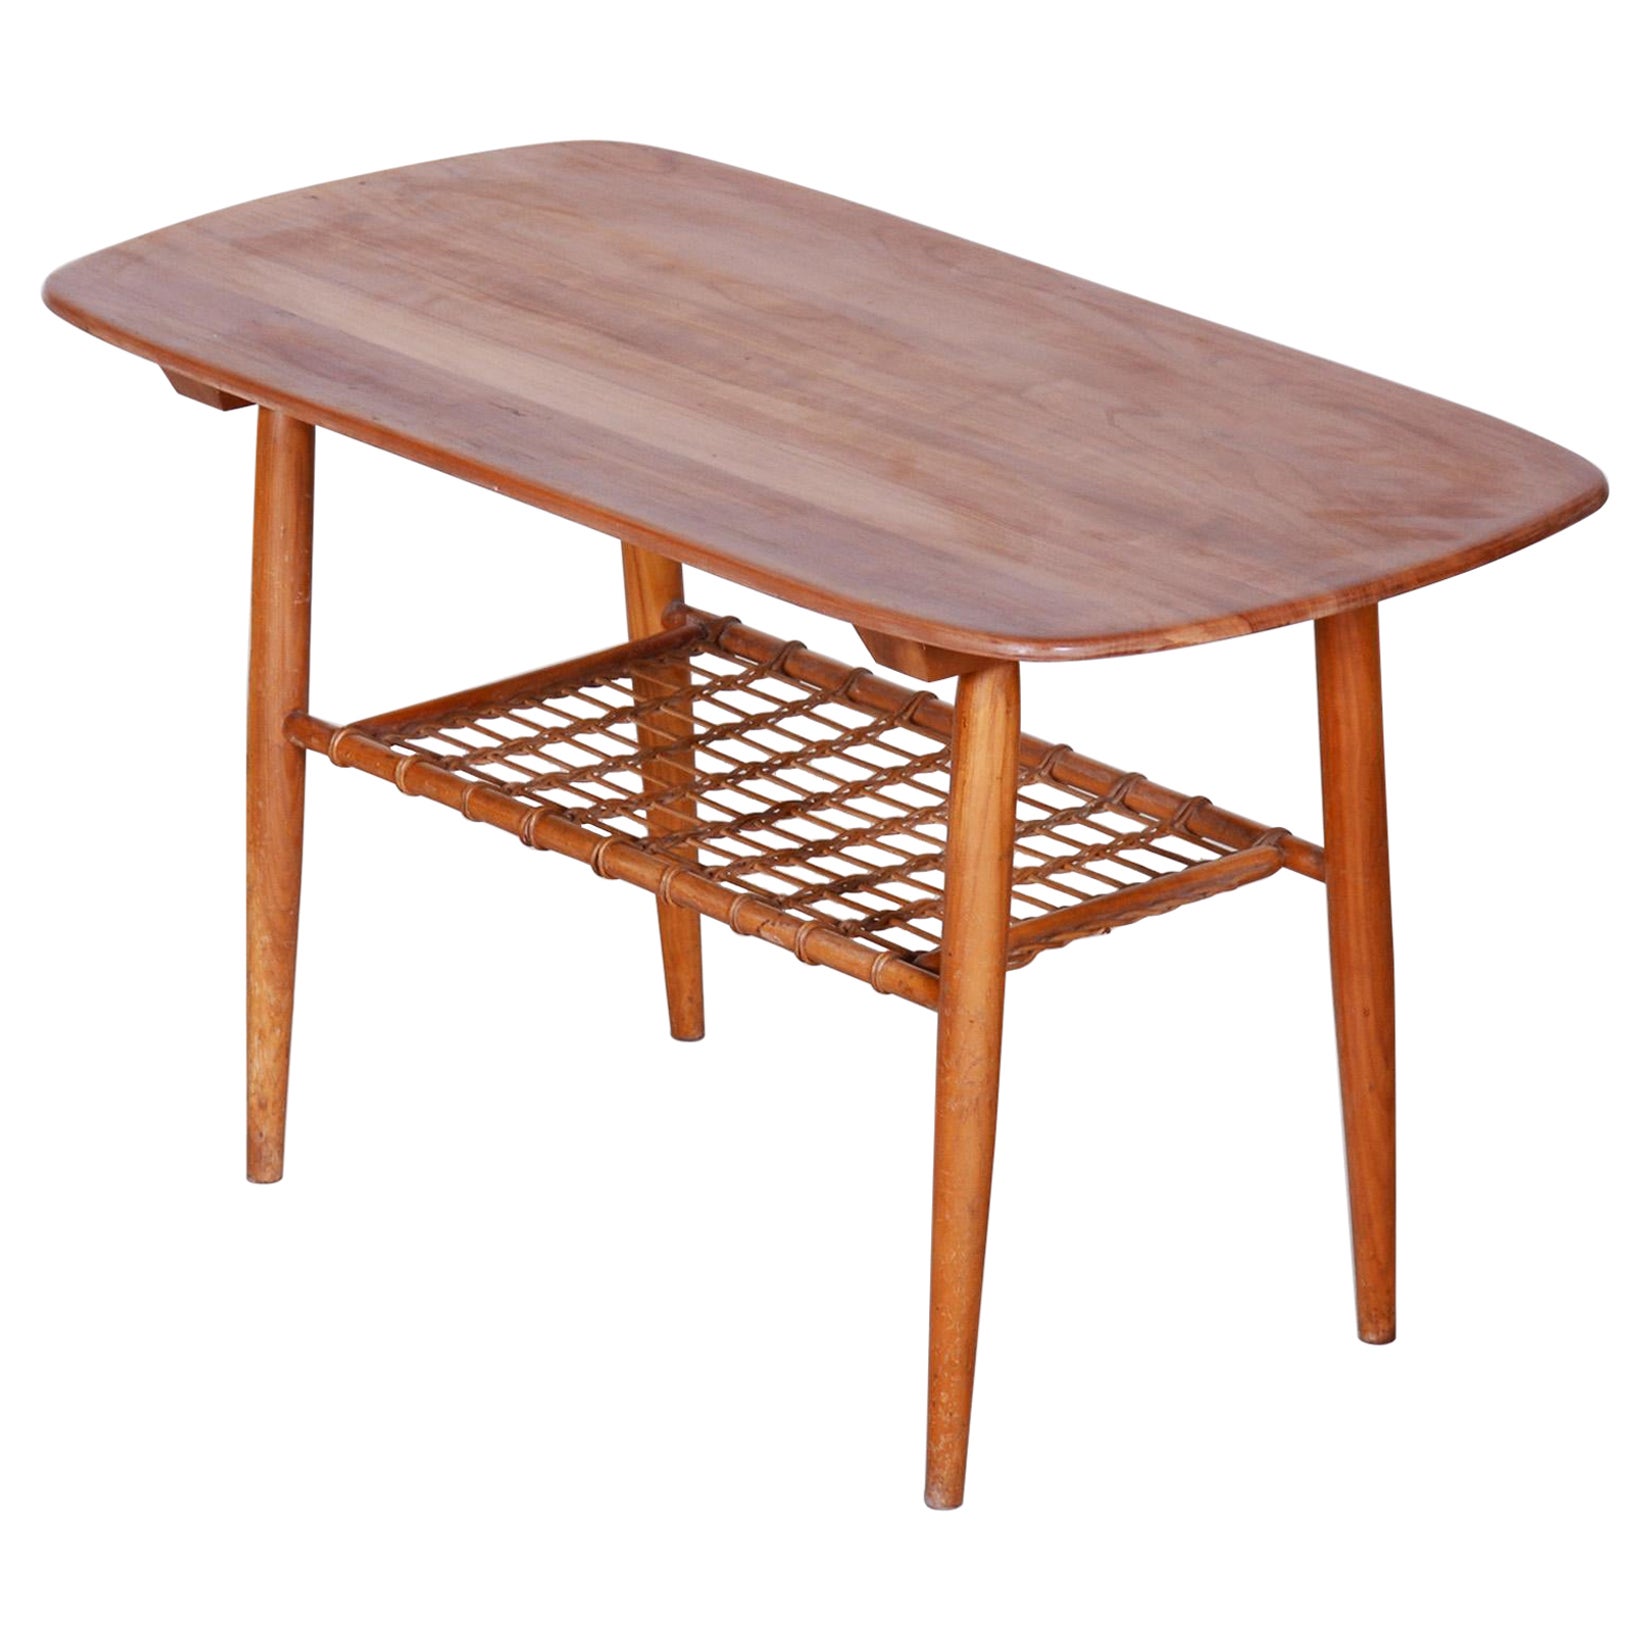 Restored Mid-Century Style Coffee Table, Cherry-Tree, Rattan, 1950s, Czechia For Sale